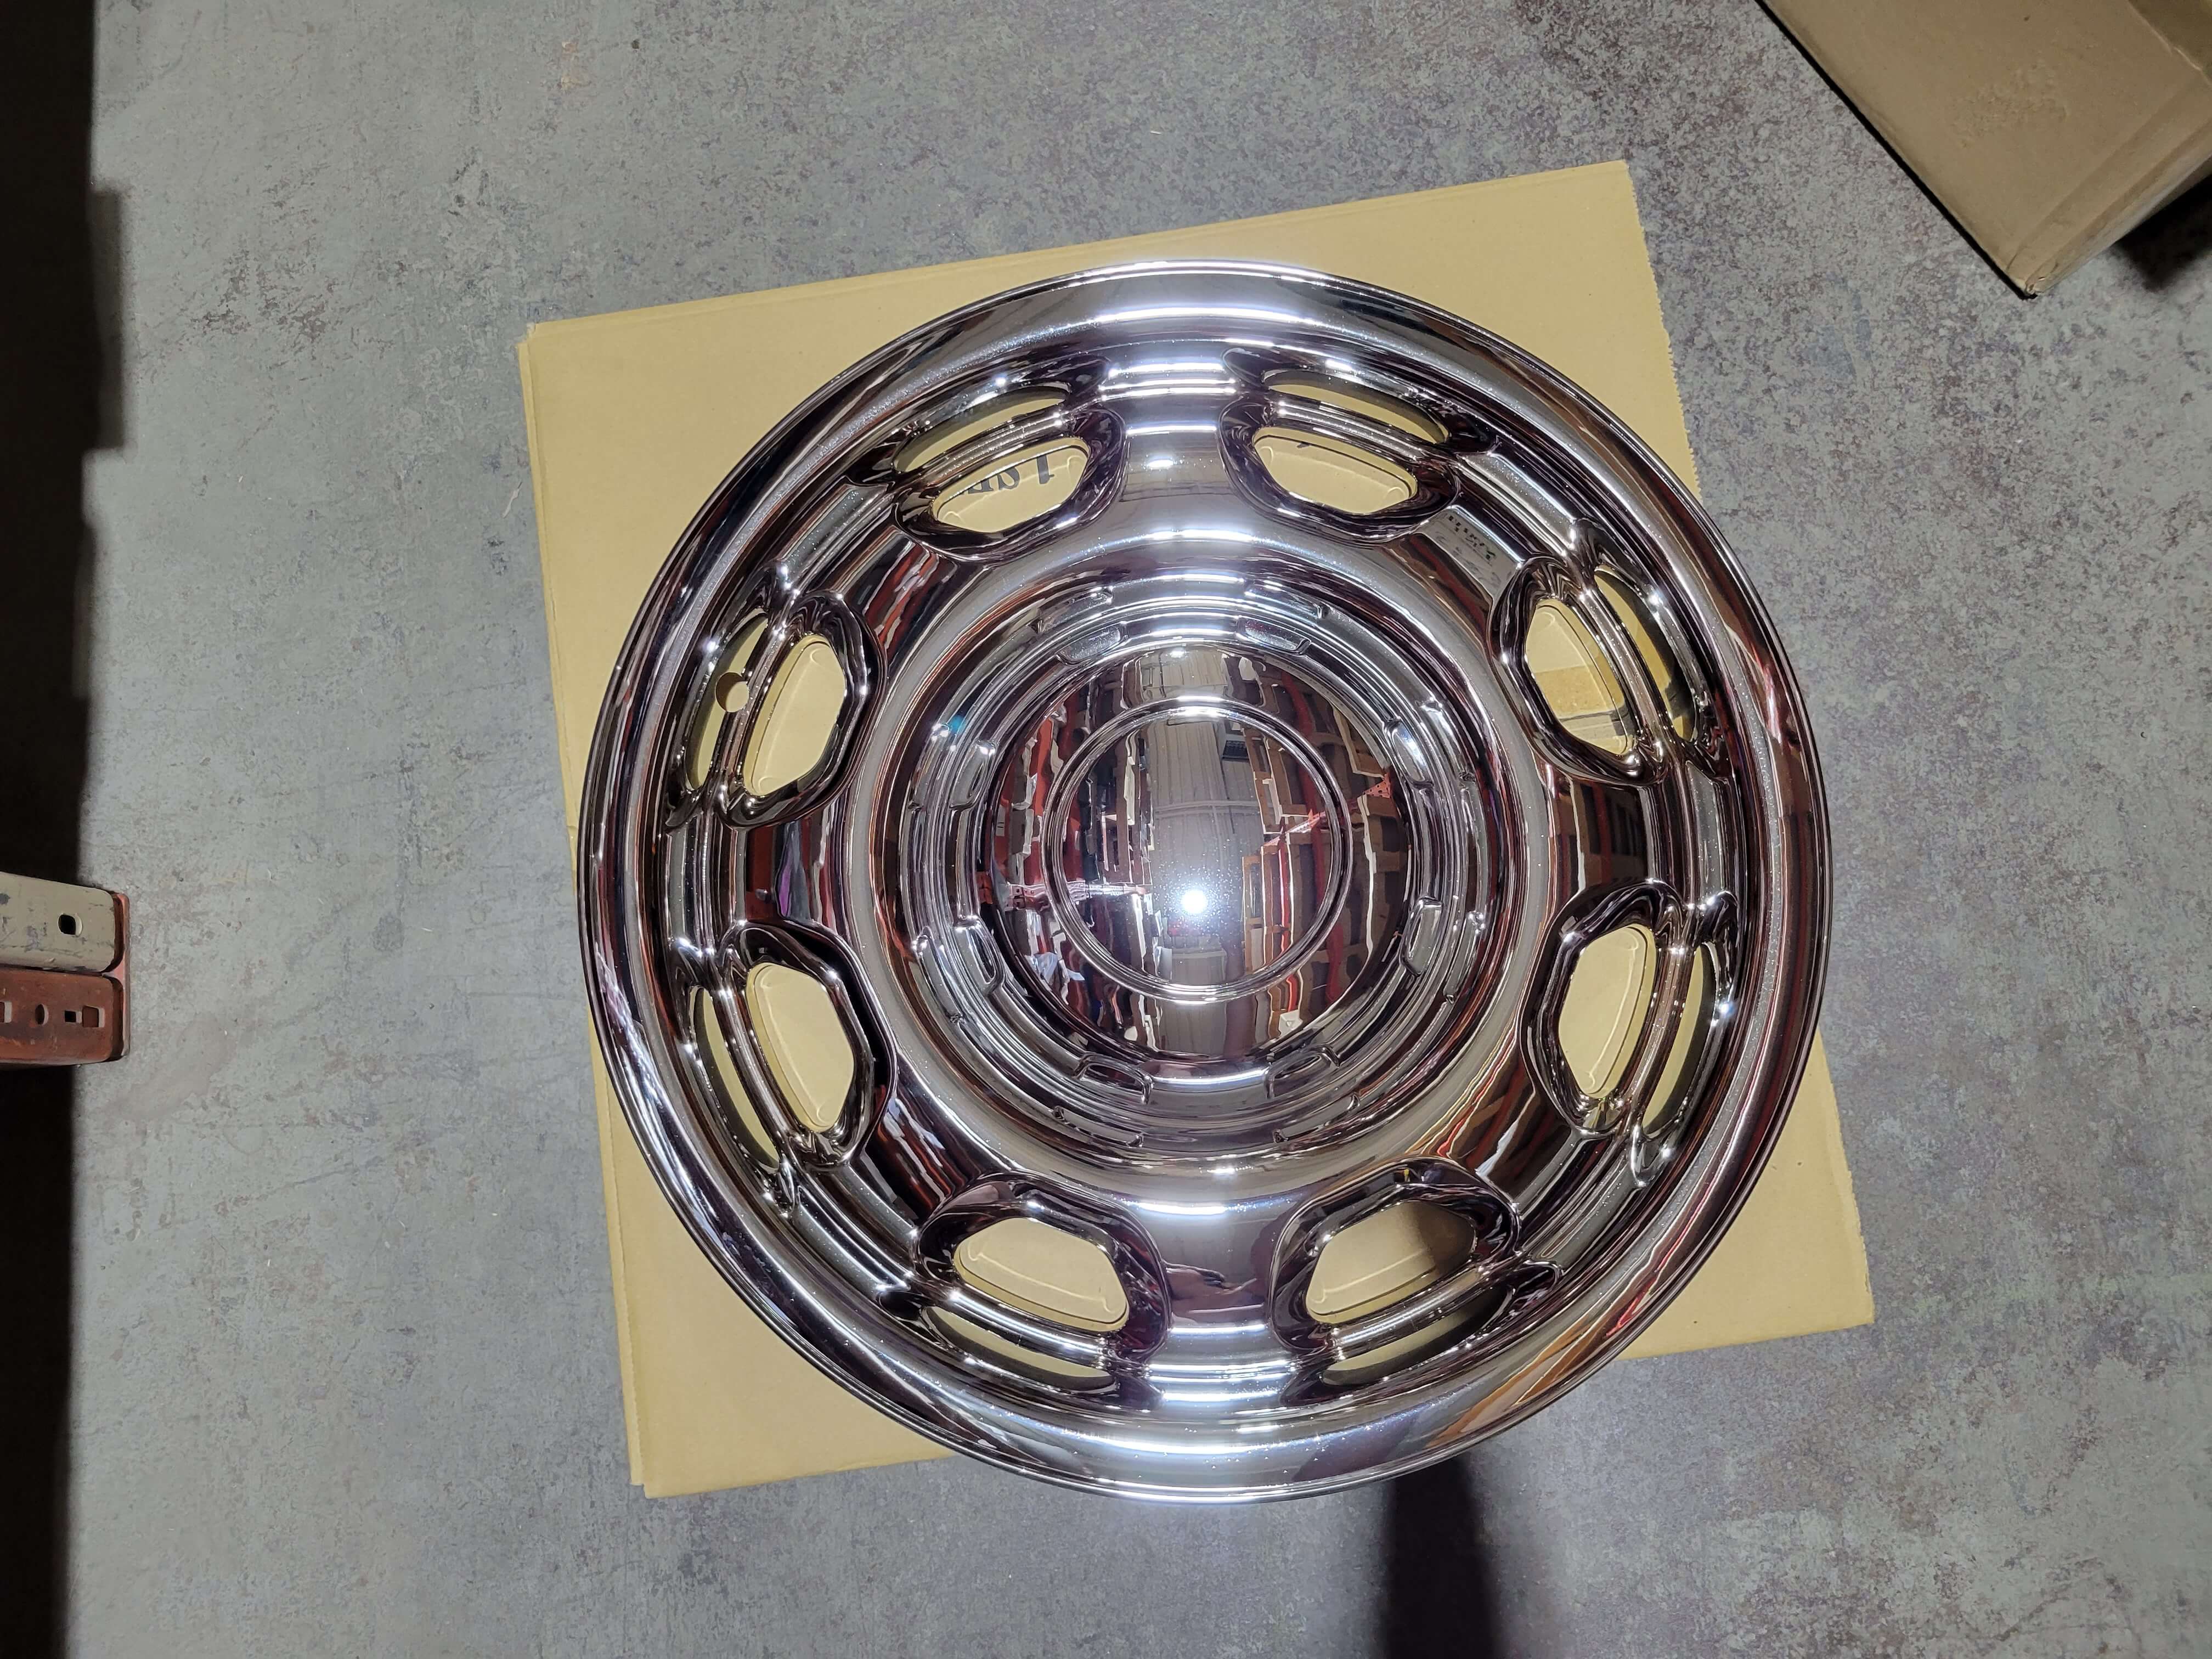 Hubcap – FORD – Ford F150 Chrome Skins (set of 4)